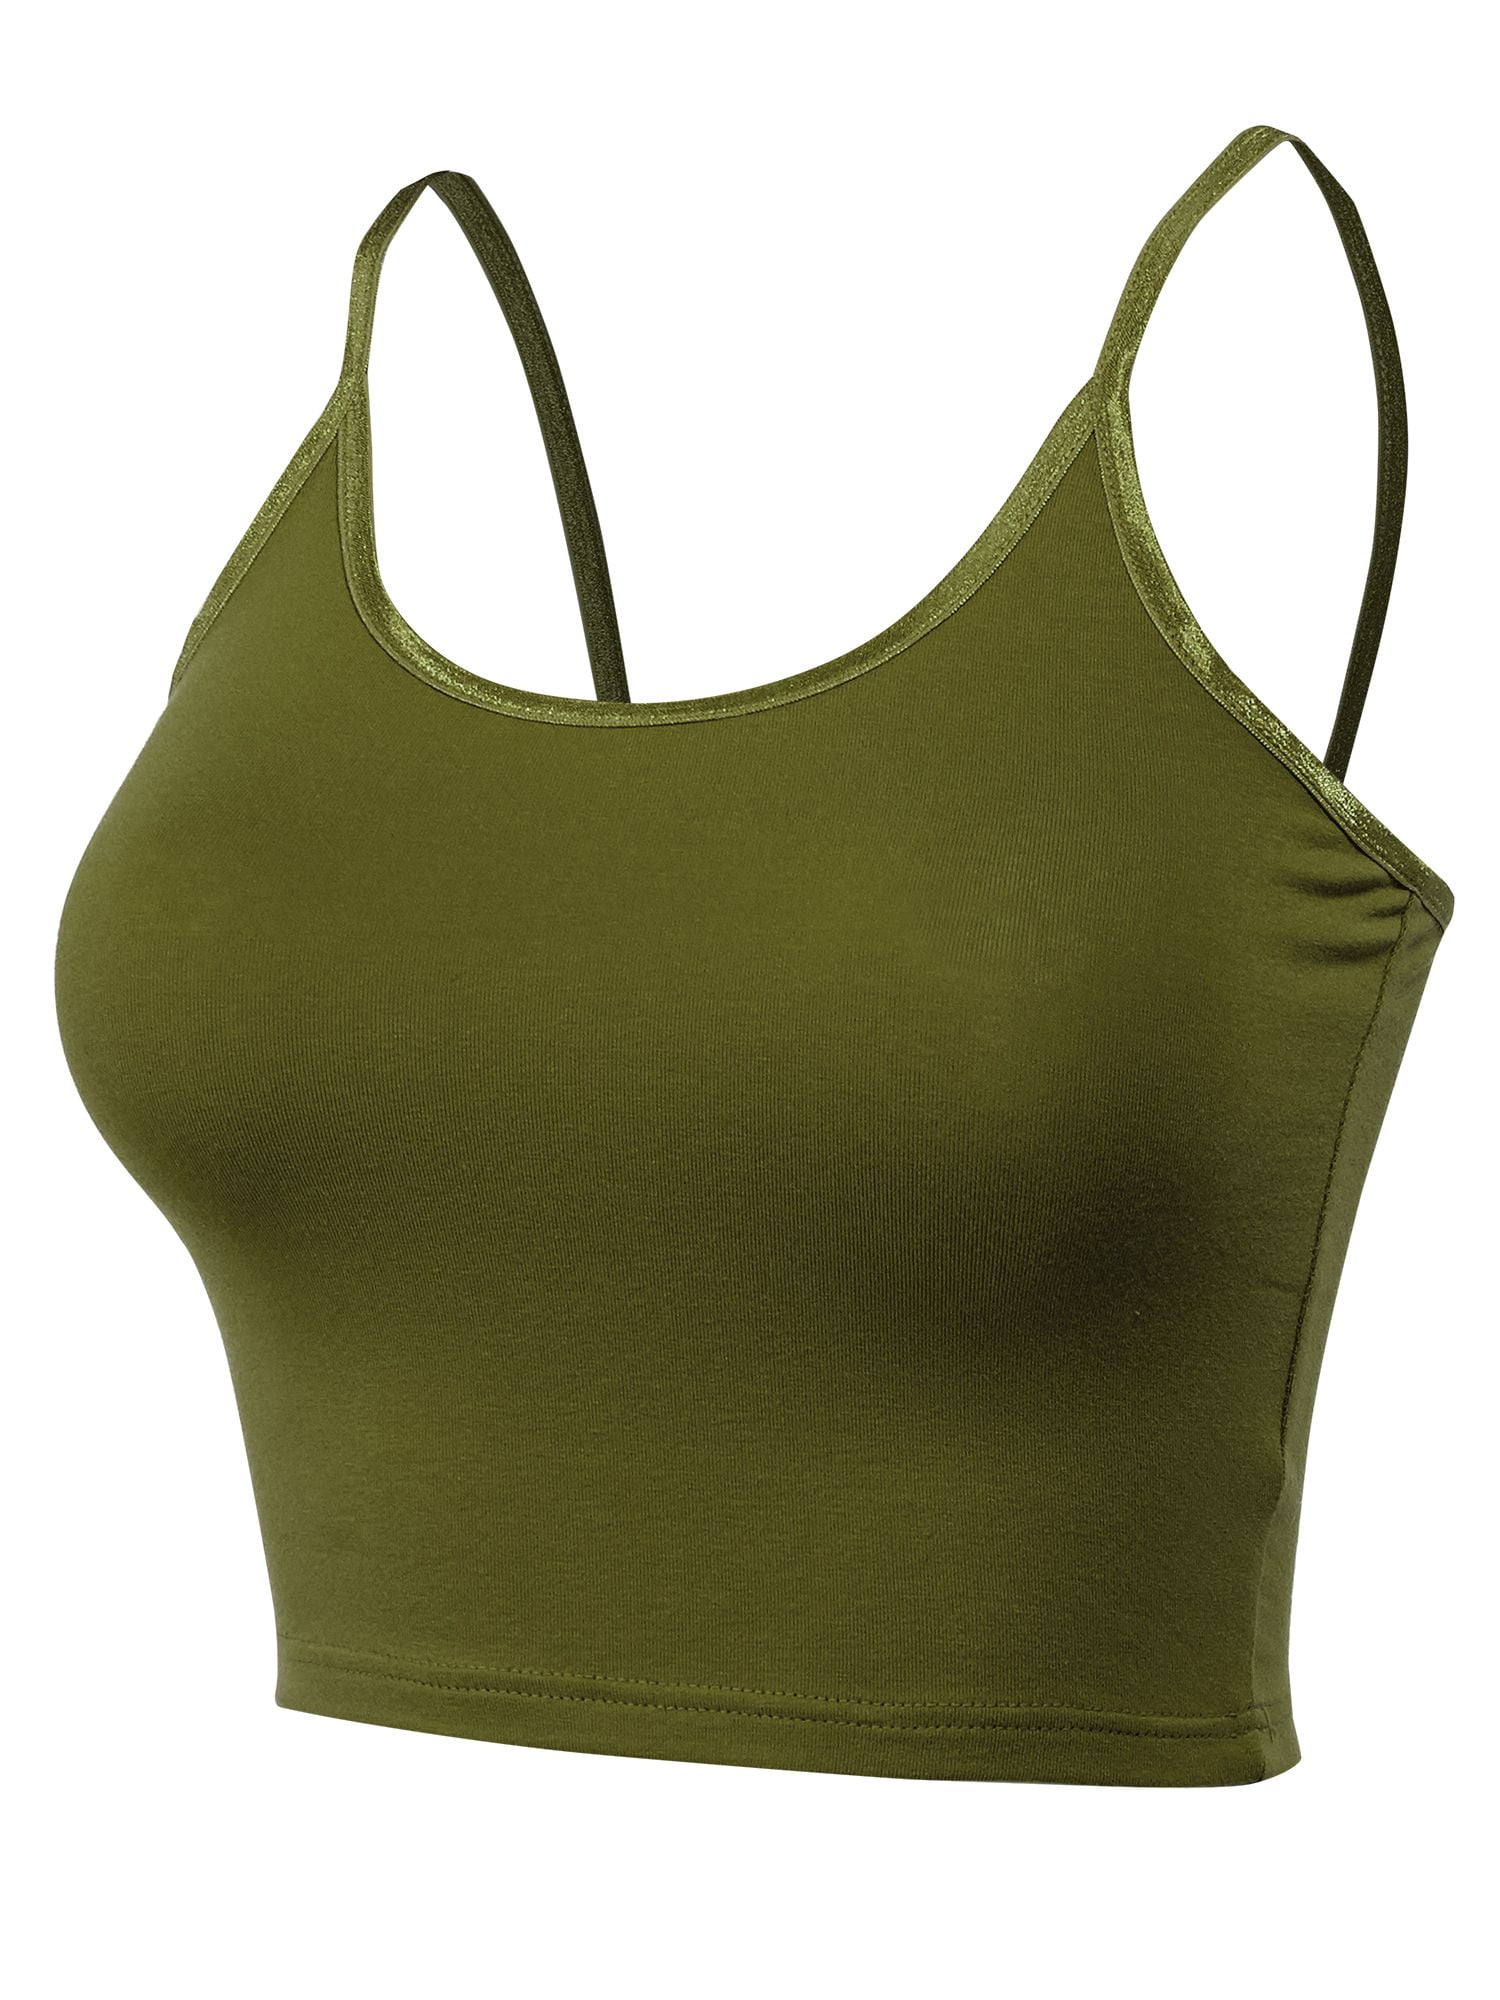 Jalioing Yoga Sets for Women Spaghetti Strap Tank Short Top Solid